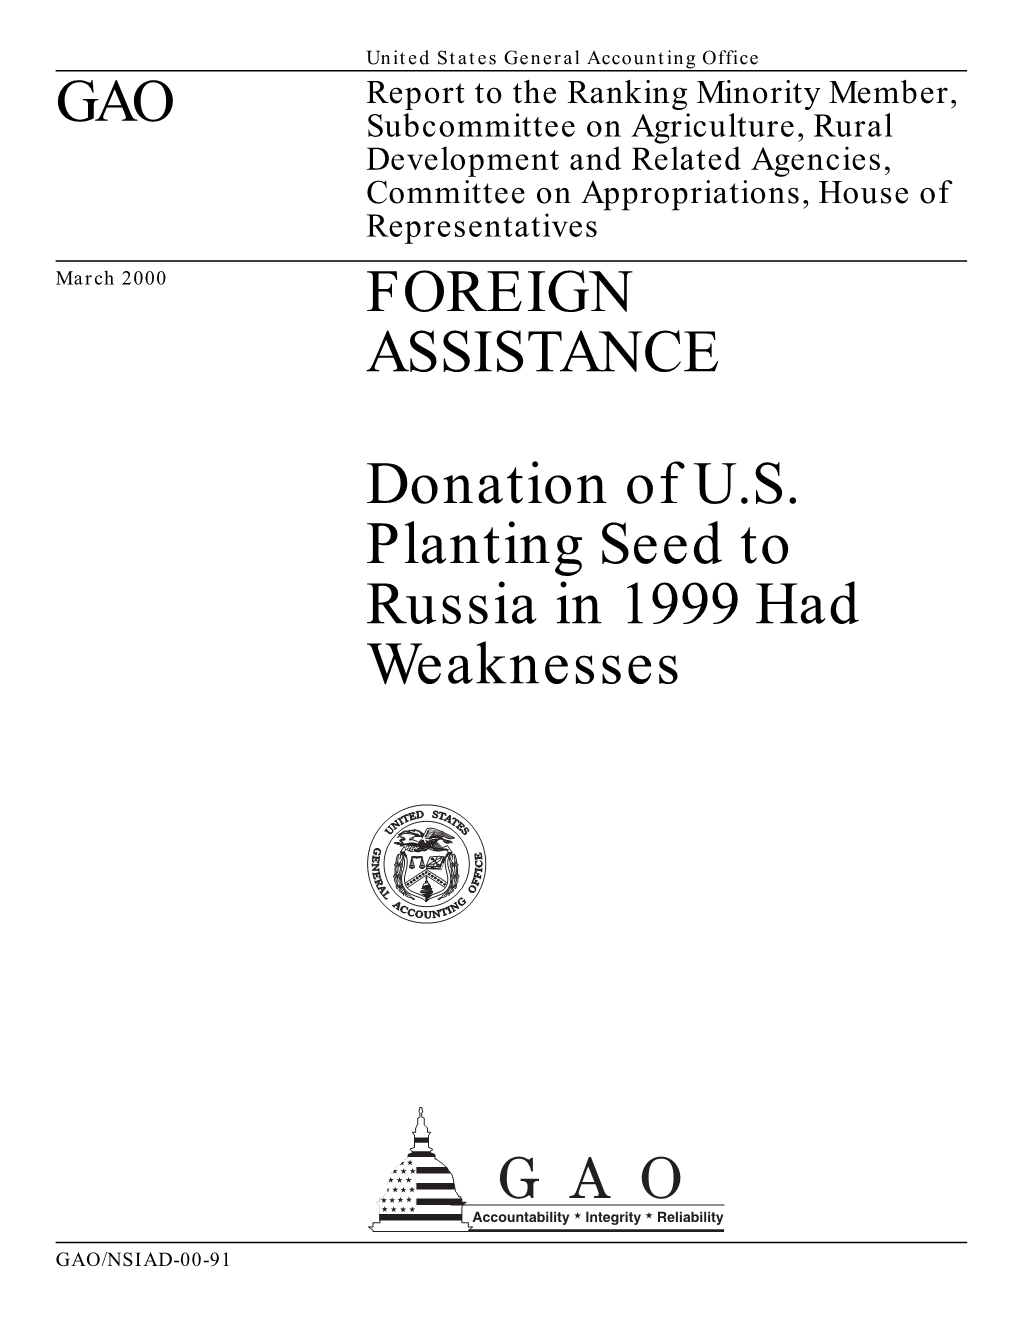 GAO FOREIGN ASSISTANCE Donation of U.S. Planting Seed To